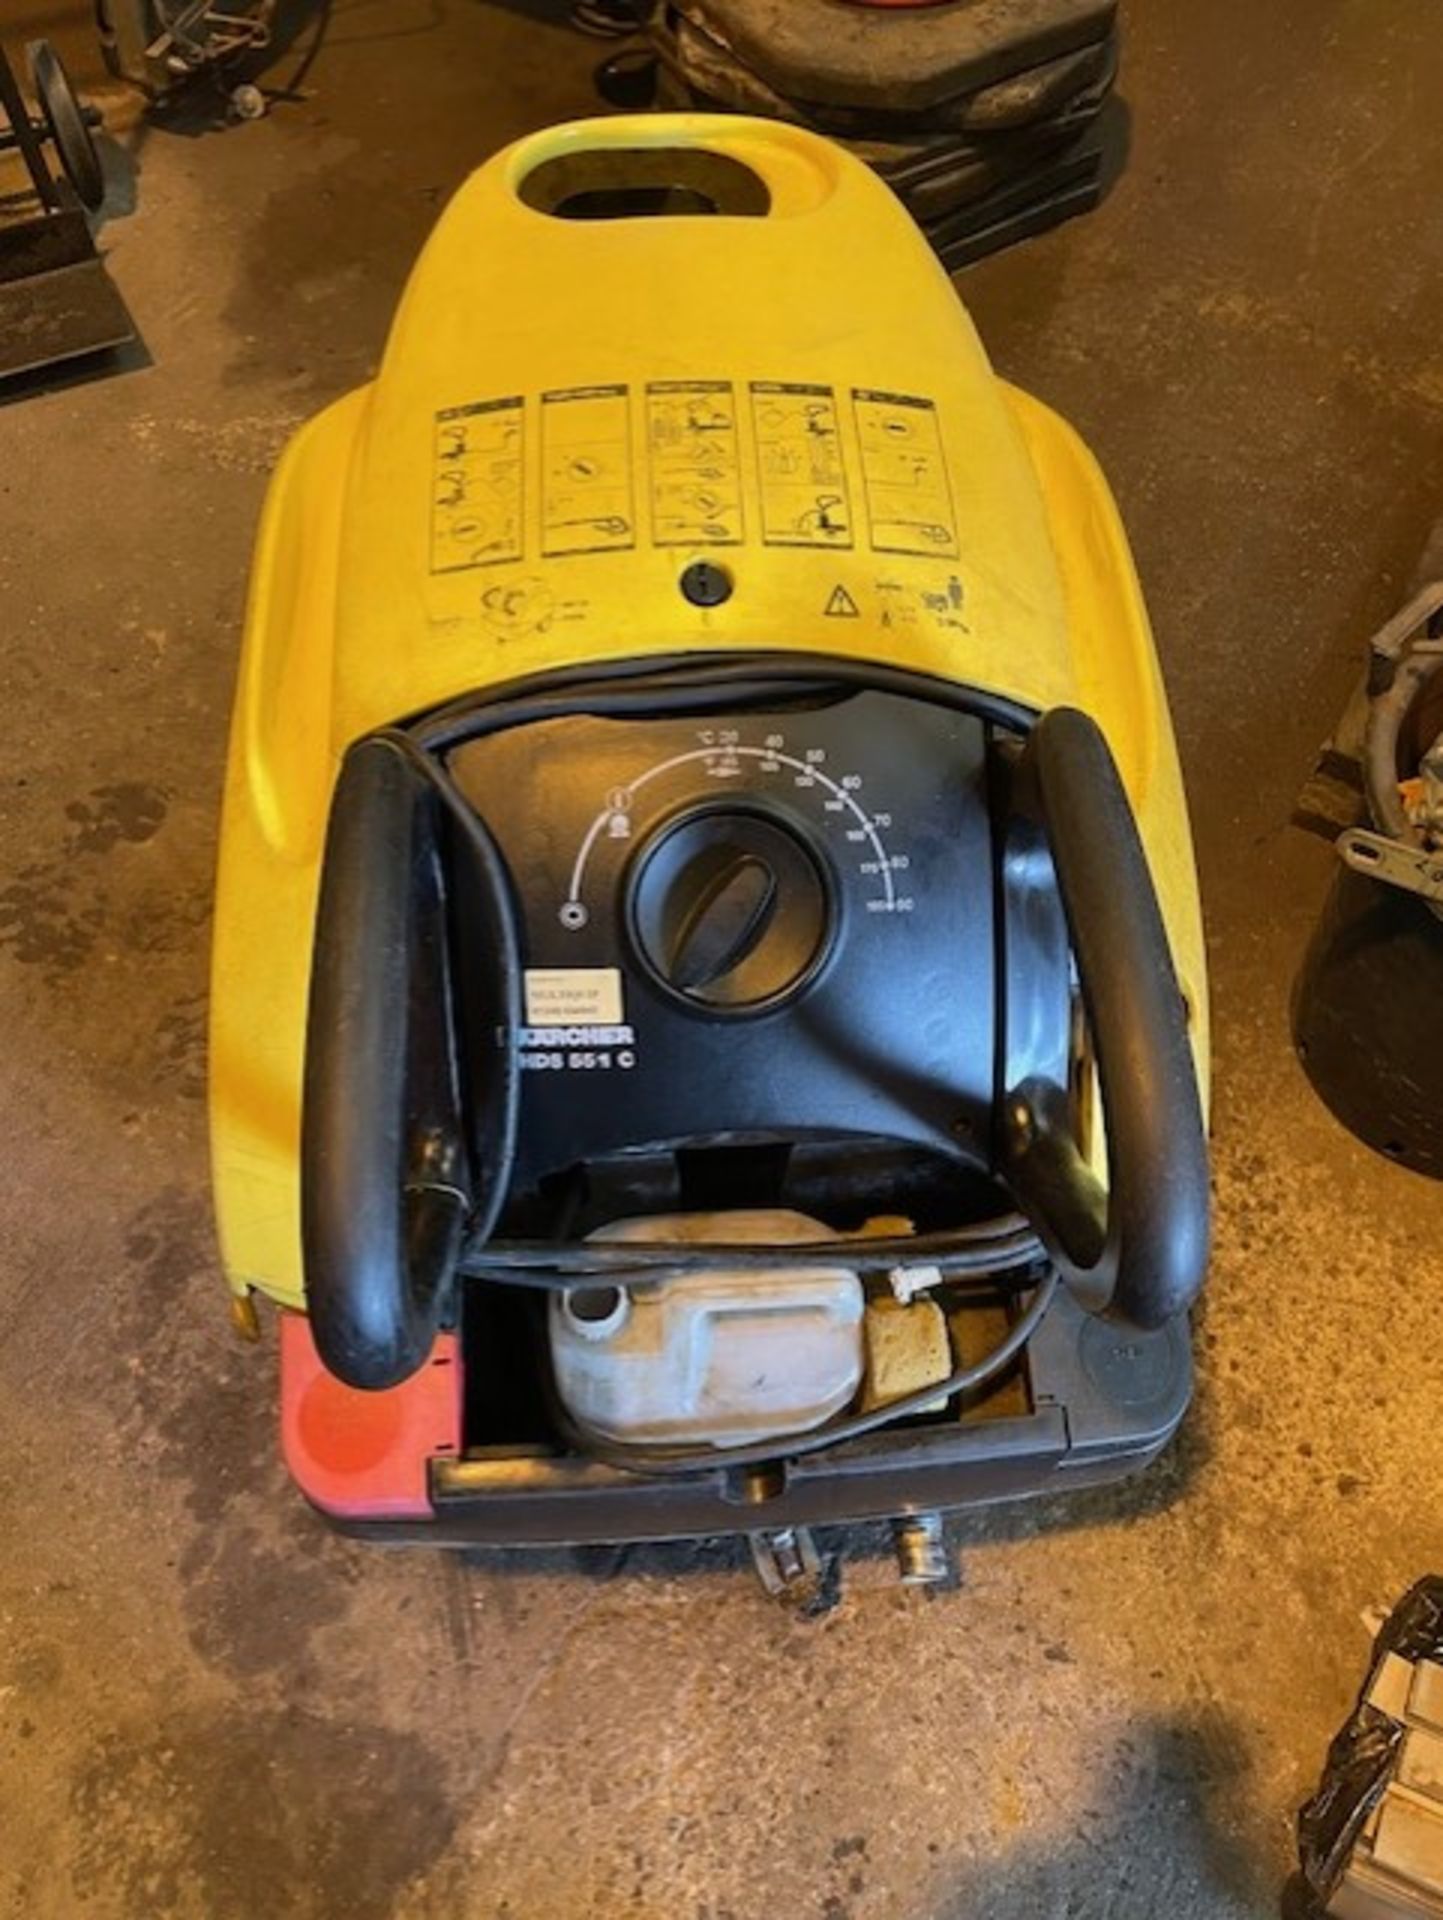 Karcher hot and cold pressure washer hds551 c model it’s in good condition still comes with hose and - Bild 3 aus 10